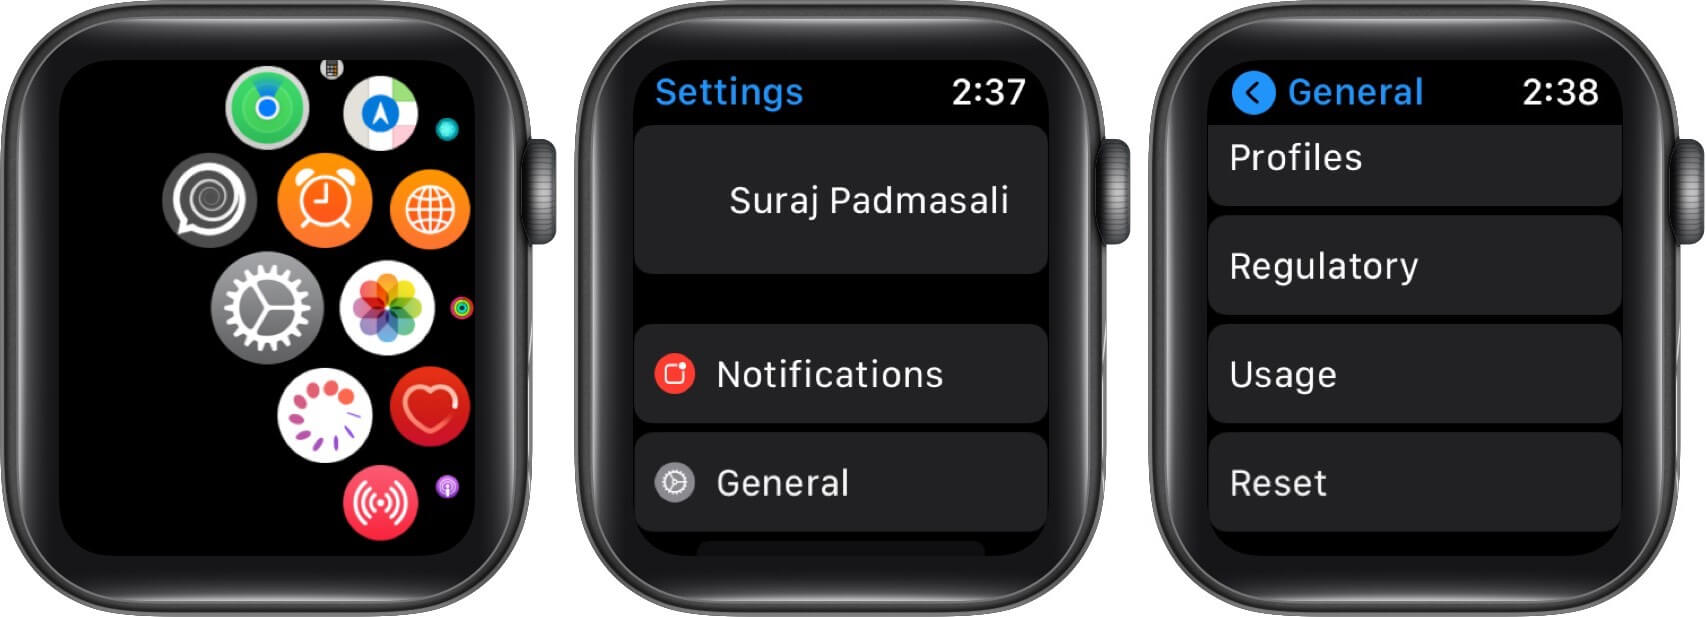 open settings tap on general then tap on reset on apple watch 1